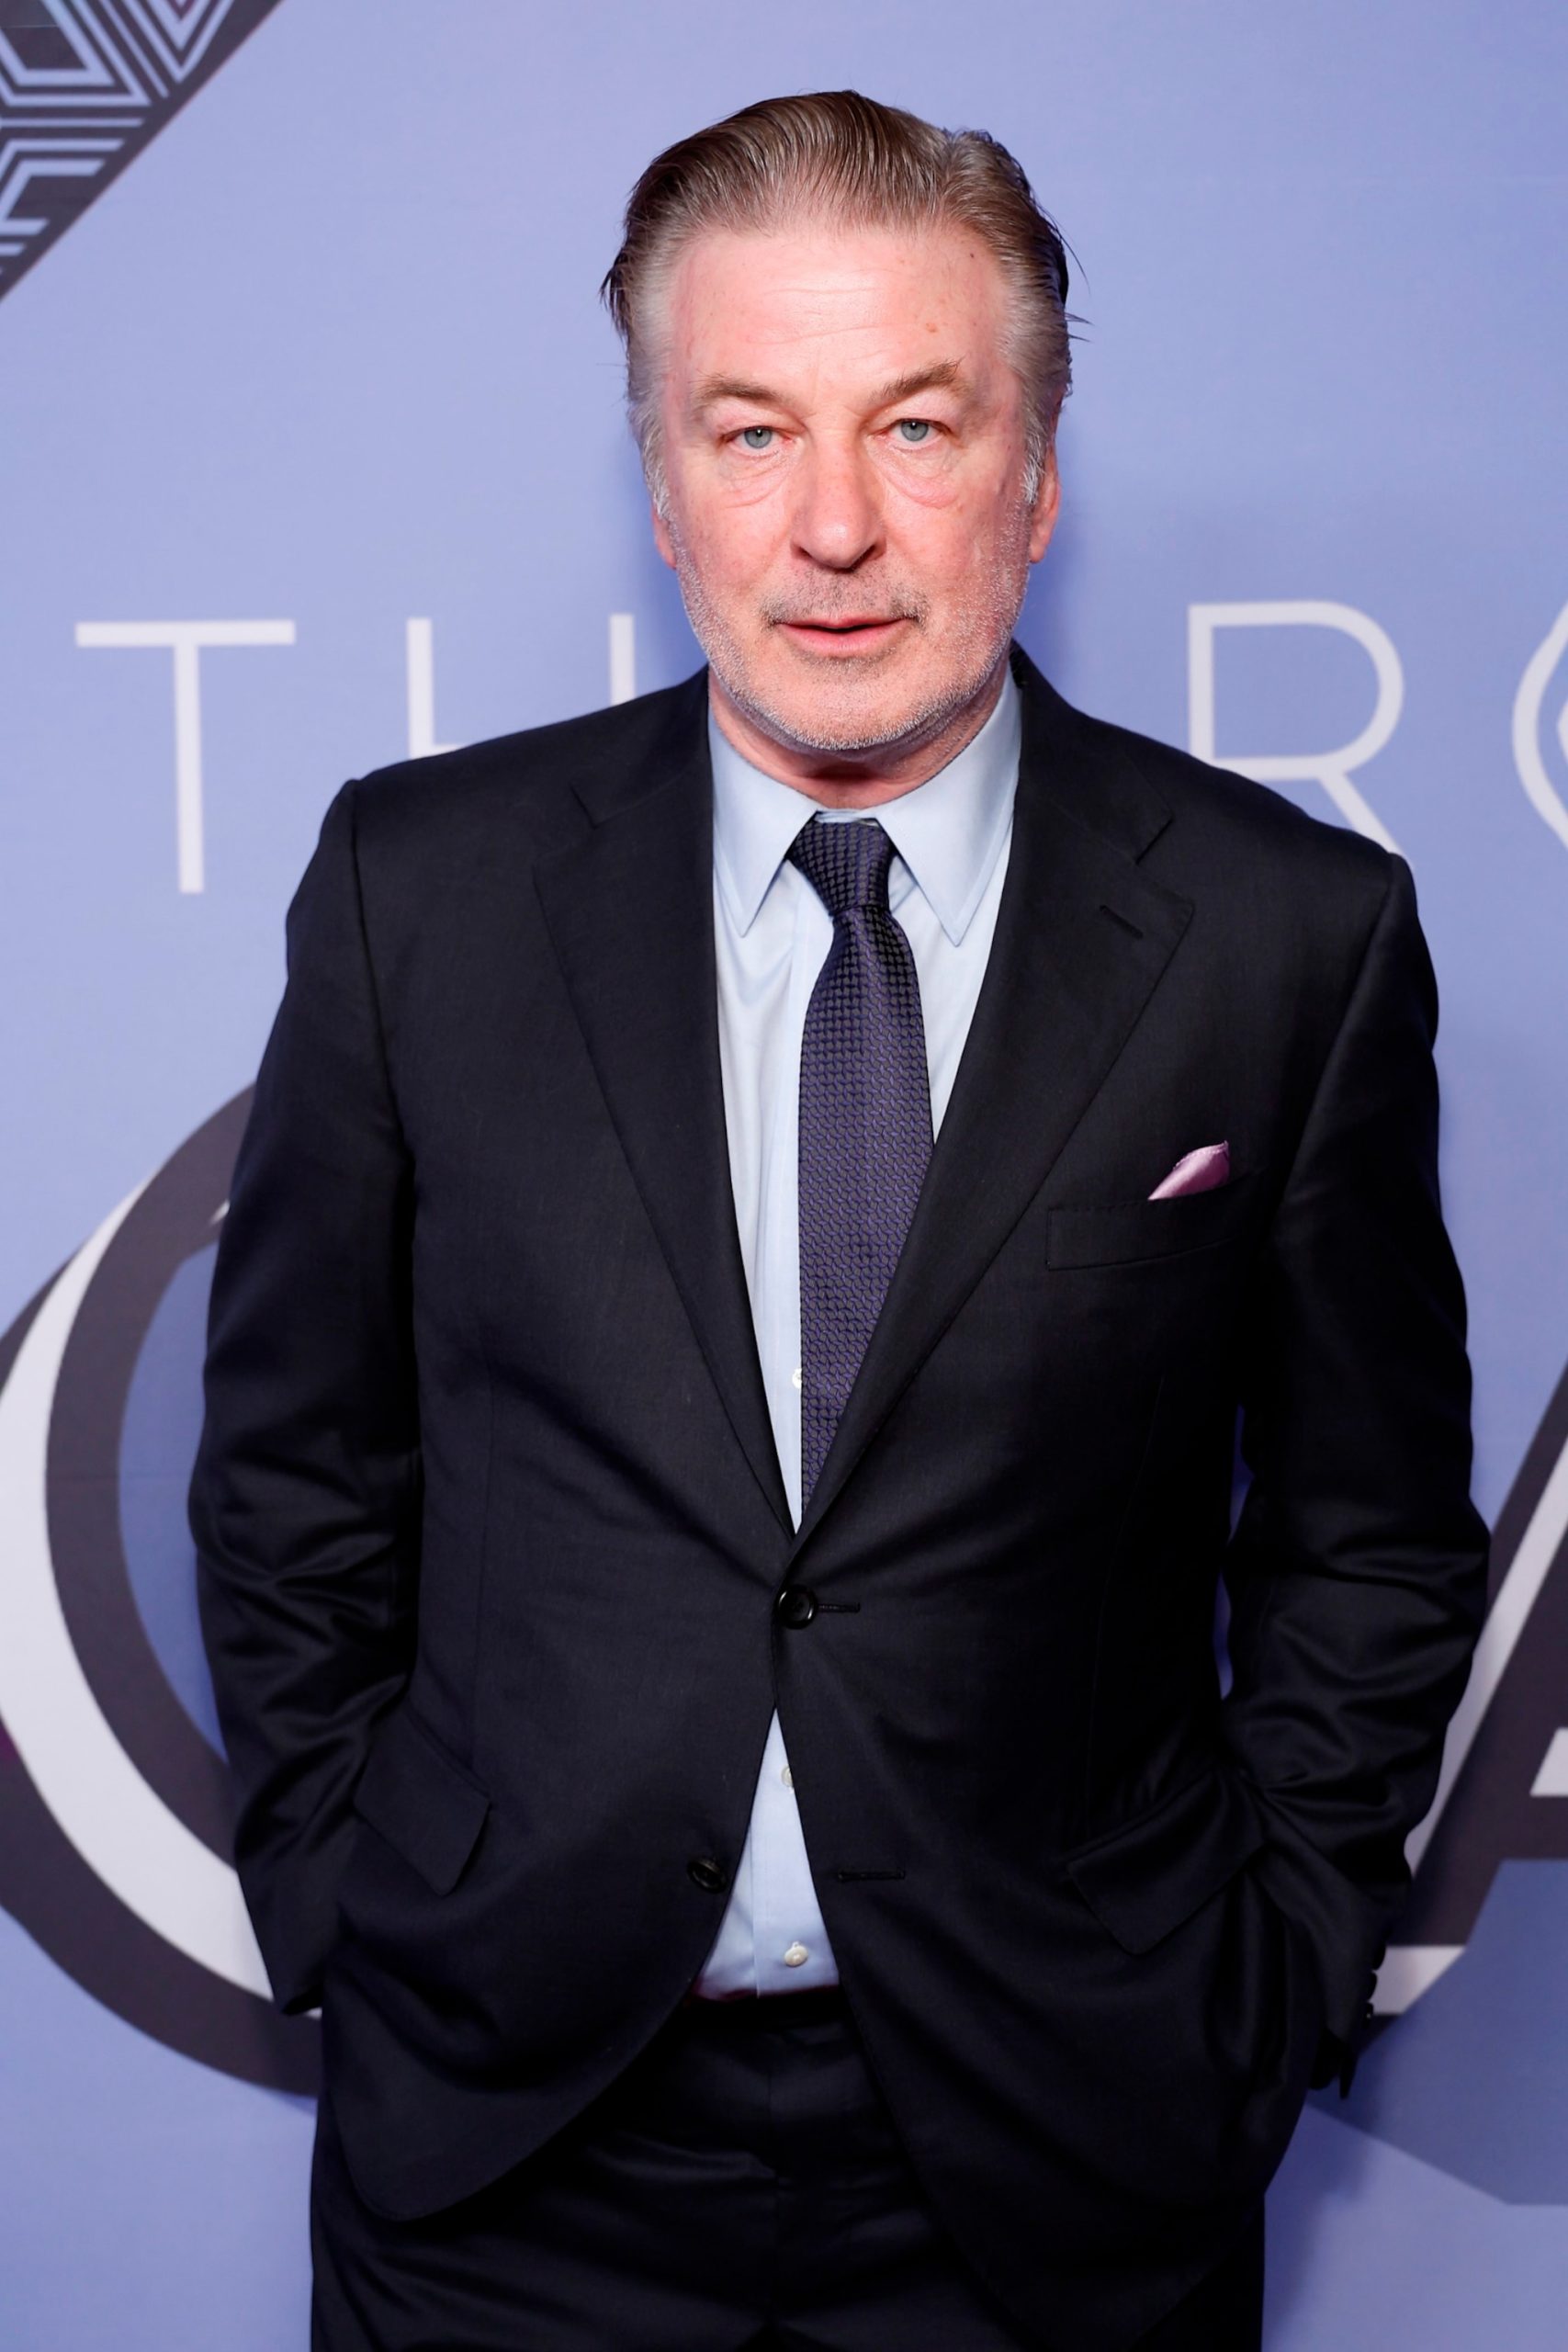 Judge rules against Alec Baldwin's attempt to have 'Rust' charge dismissed due to firearm evidence